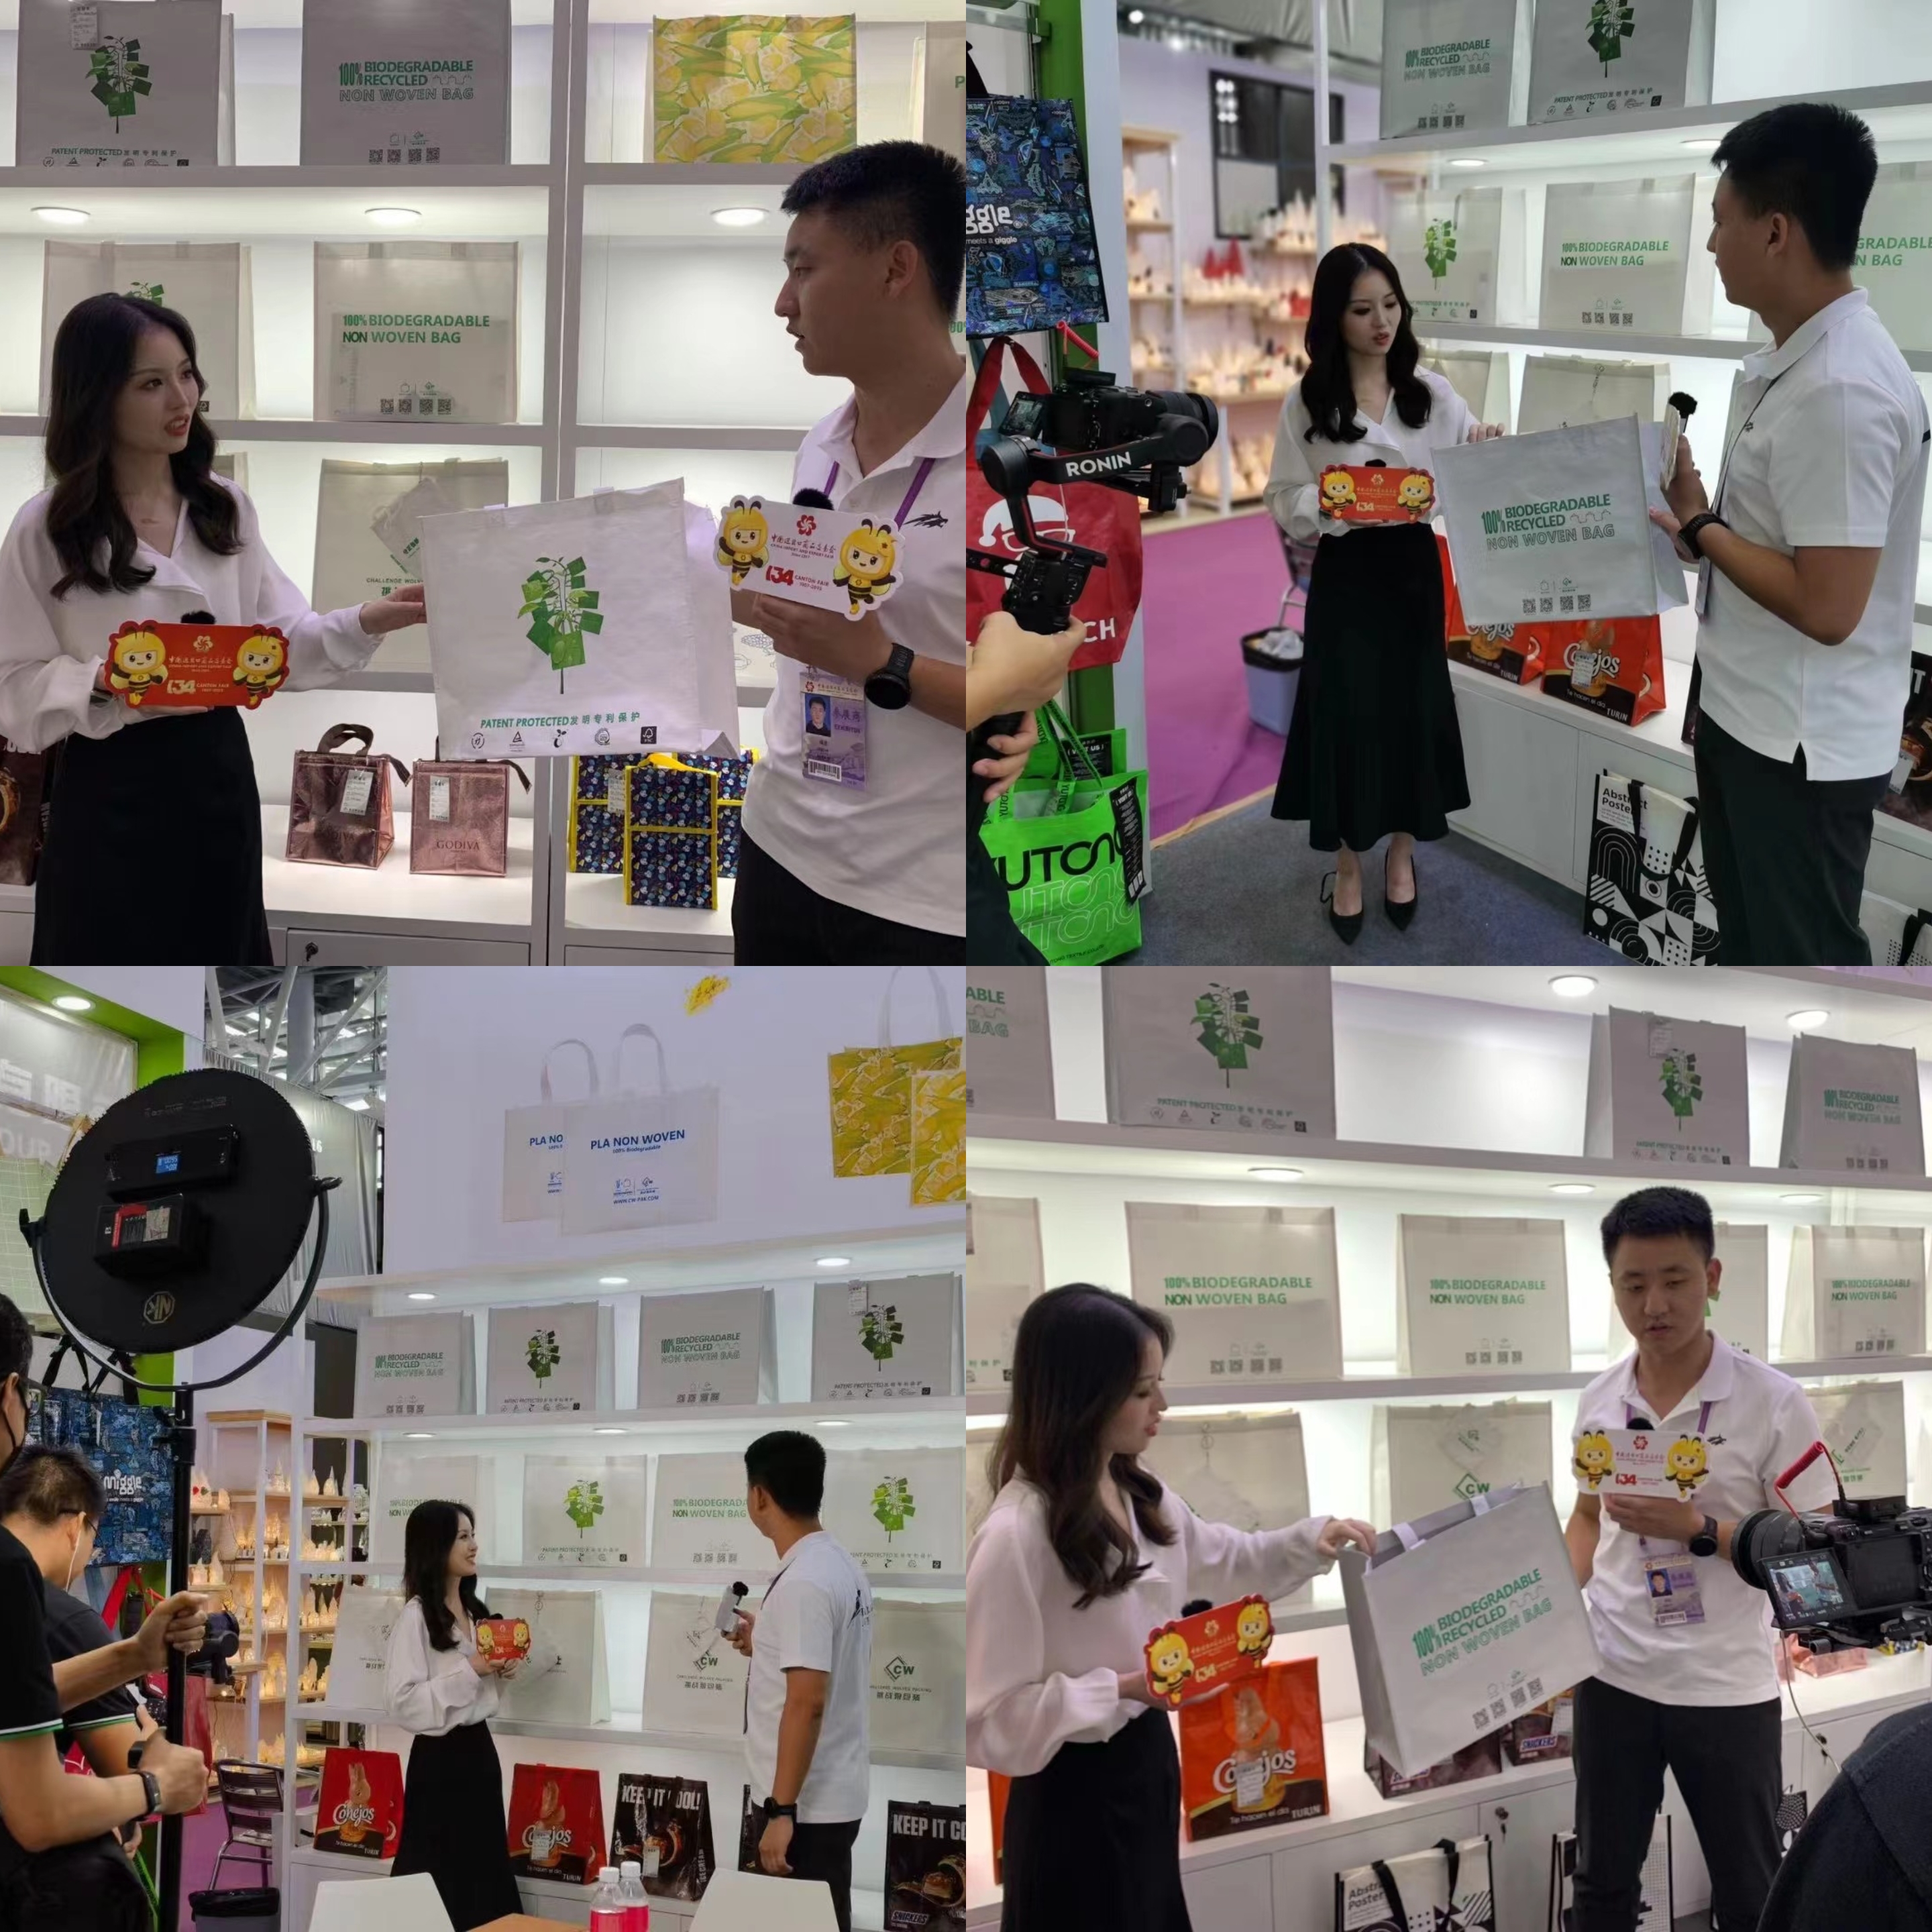 Canton Fair Official interviewed our company's biodegradable product project on-site